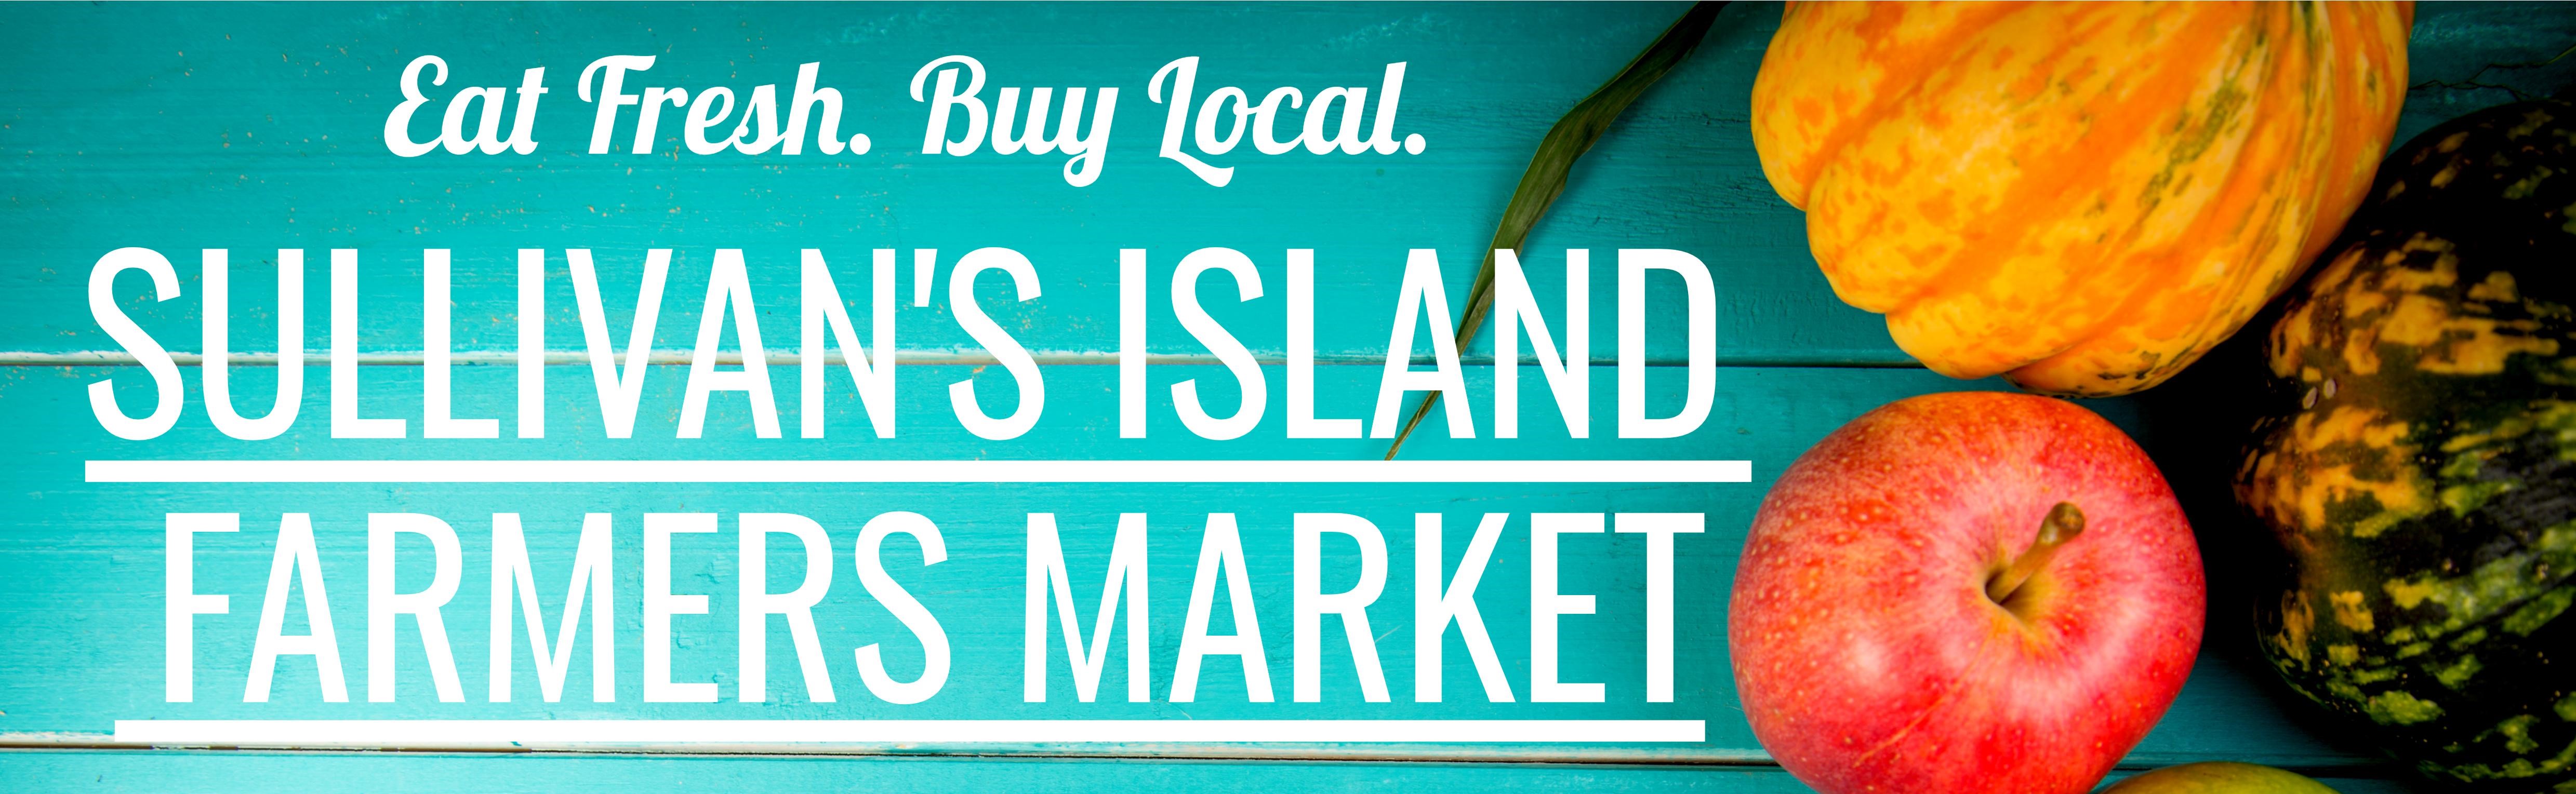  Welcome to the Sullivan's Island Farmers Market